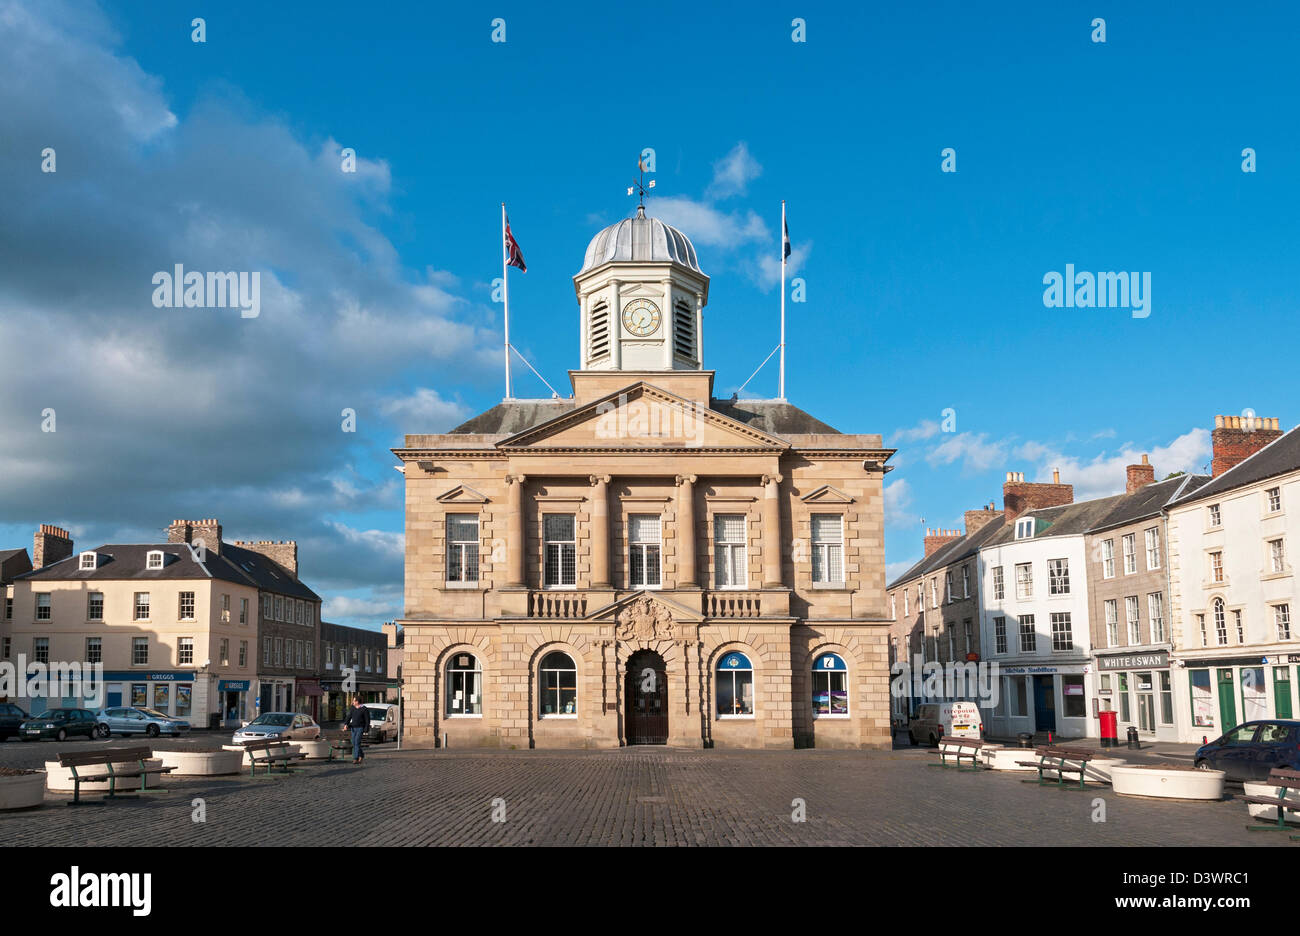 Scotland, Scottish Borders, Kelso, The Square, 19C Town Hall Stock Photo